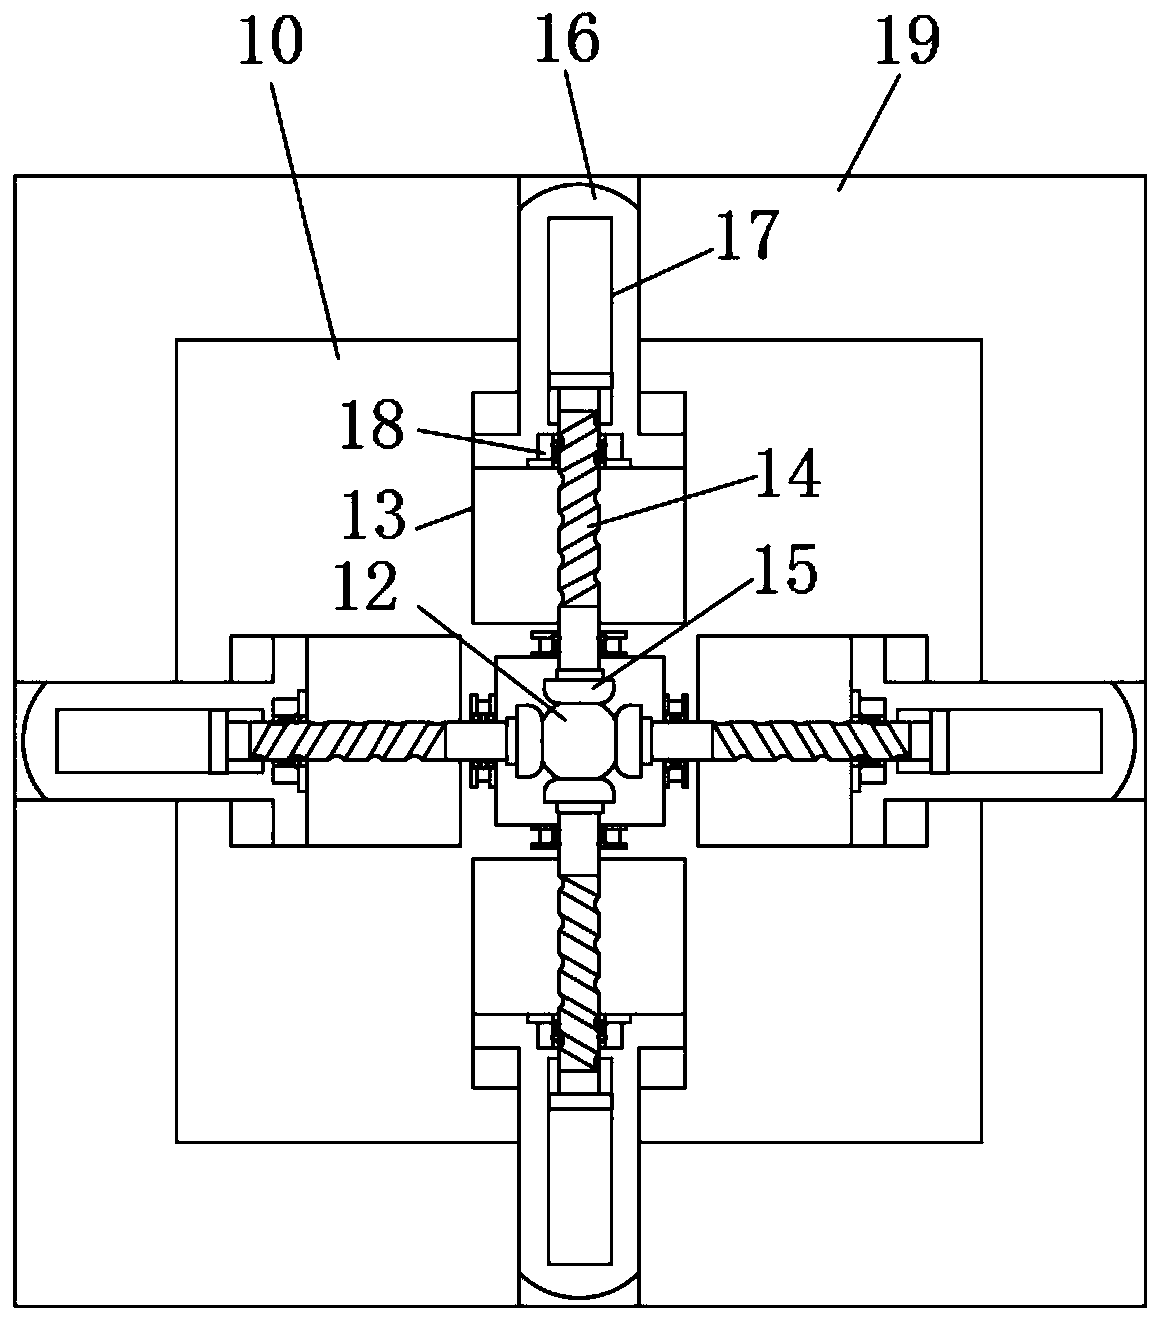 Connecting piece used for fixing steel structure panel house frame and used in multi-angle orientation mode